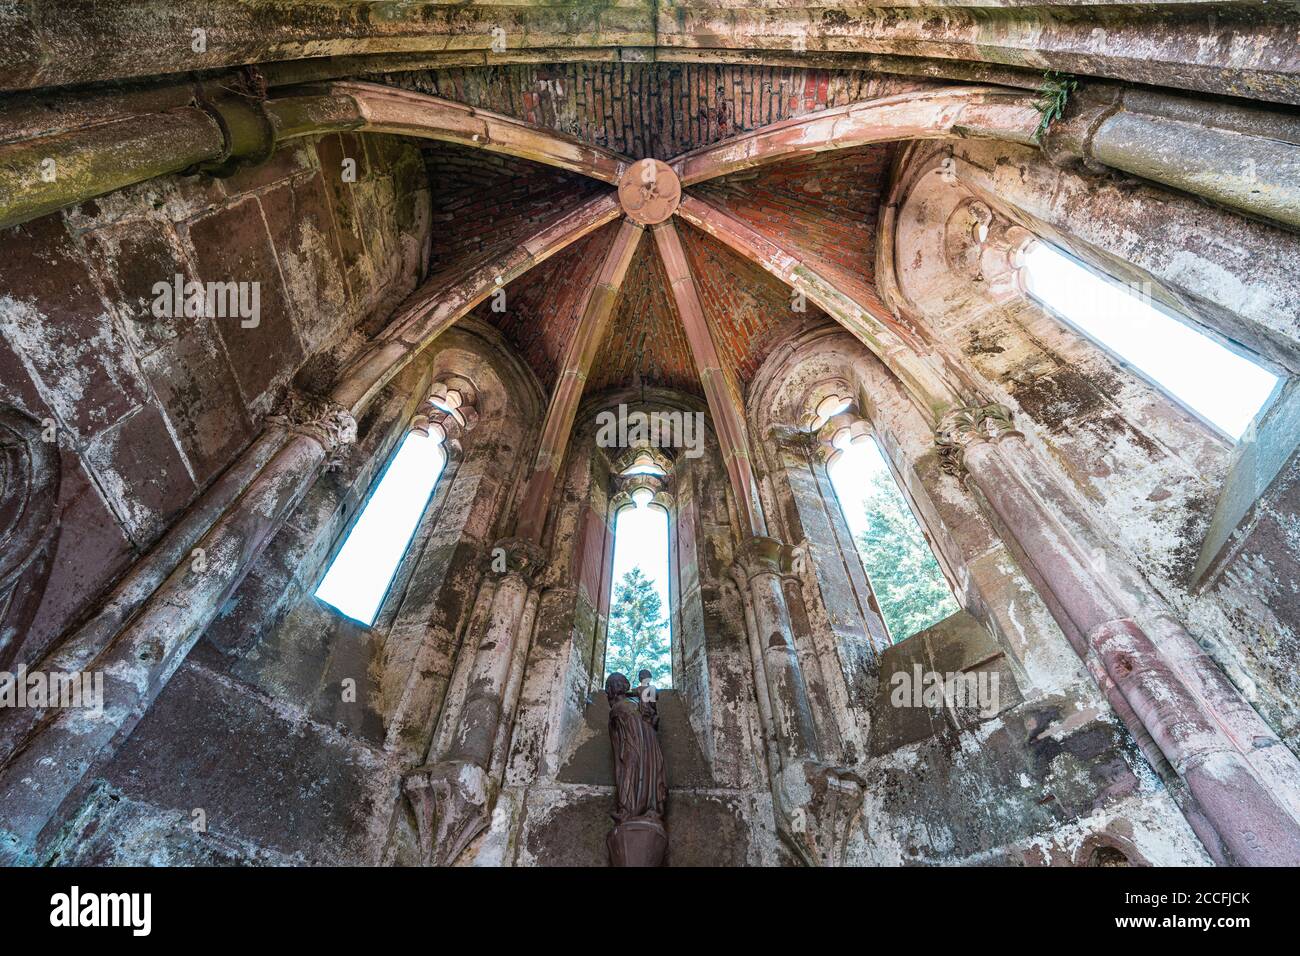 Chapel, monastery ruin, All Saints' Day, Oppenau, Black Forest, Baden-Württemberg, Germany, Europe Stock Photo